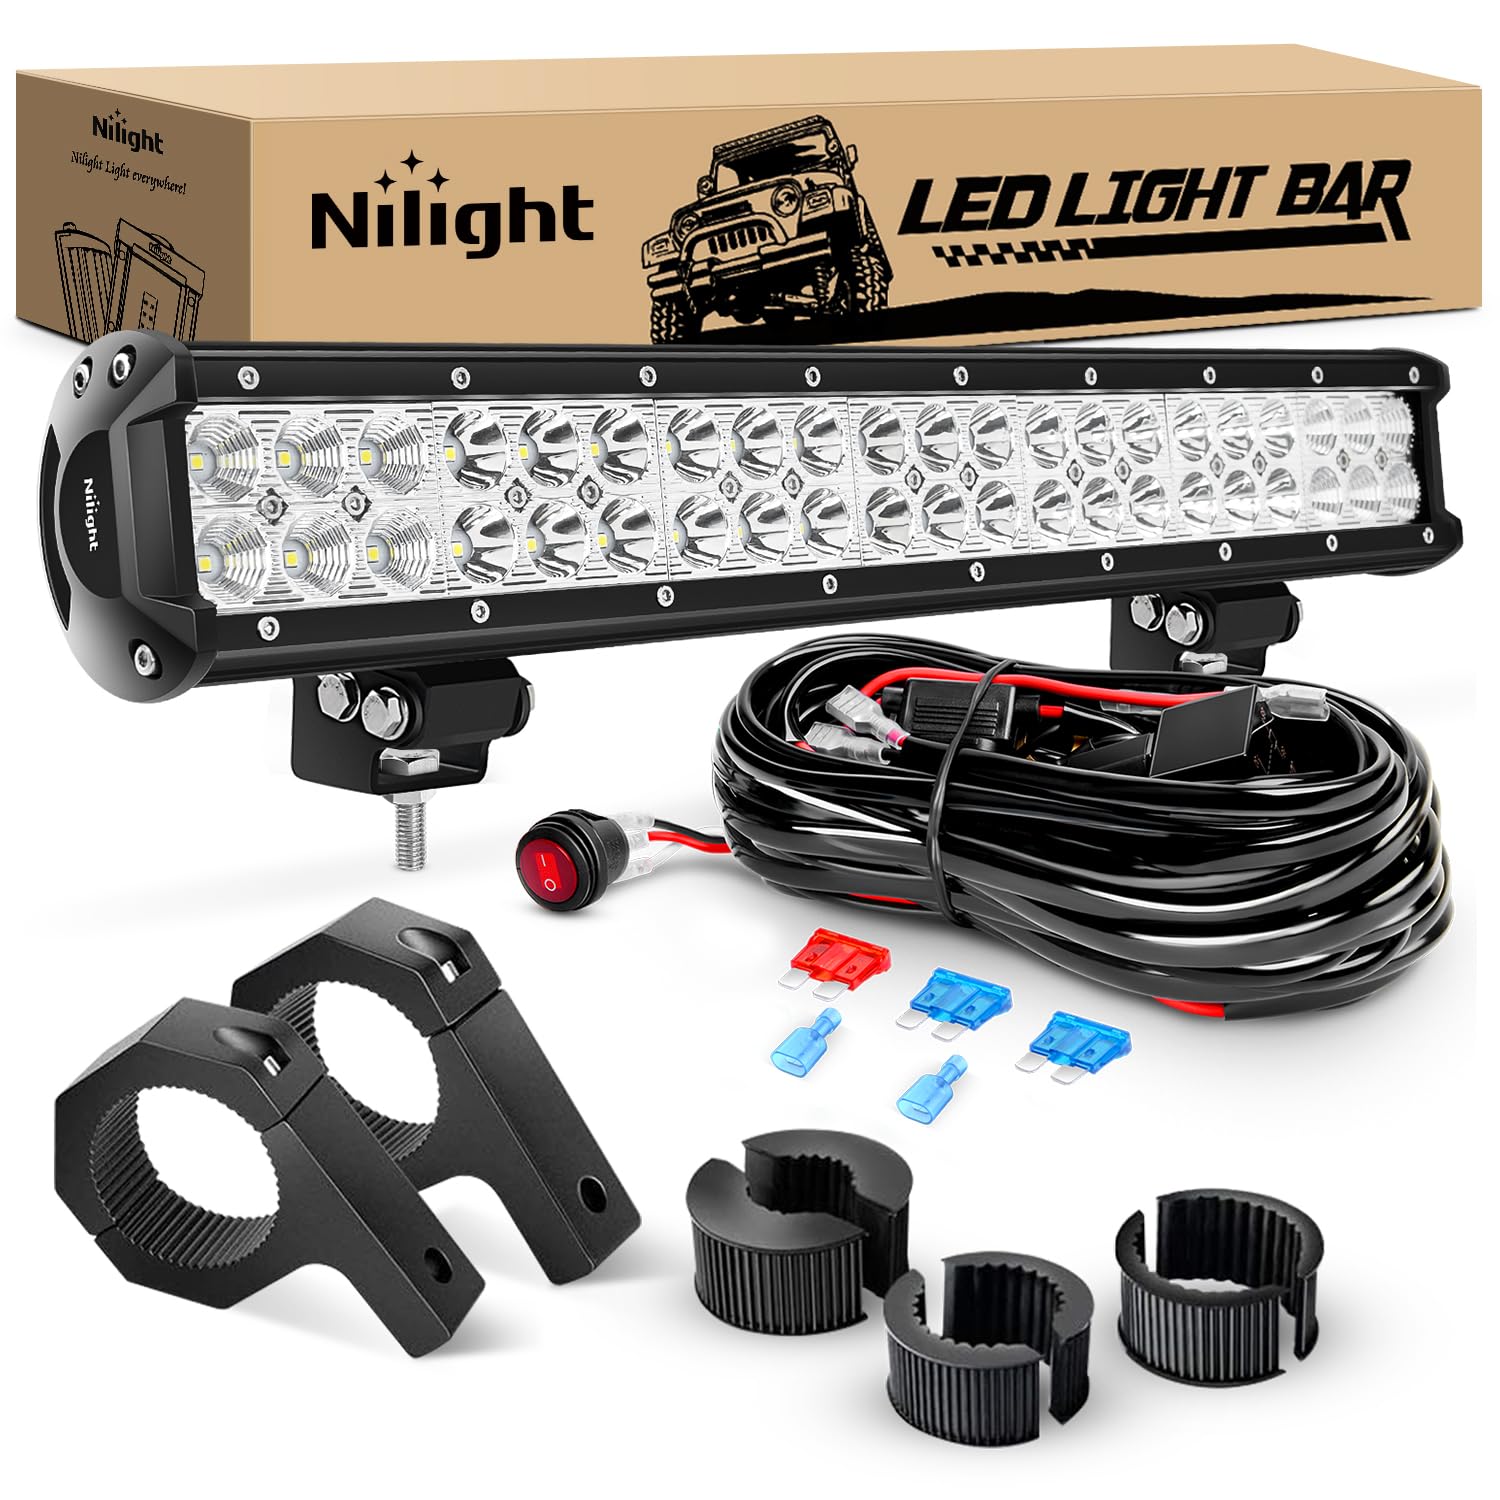 Nilight 20 Inch 126W Spot Flood Combo LED Light Bars Off-Road Light Mounting Bracket Horizontal Bar Tube Clamp with Off Road Wiring Harness, 2 Years Warranty - new